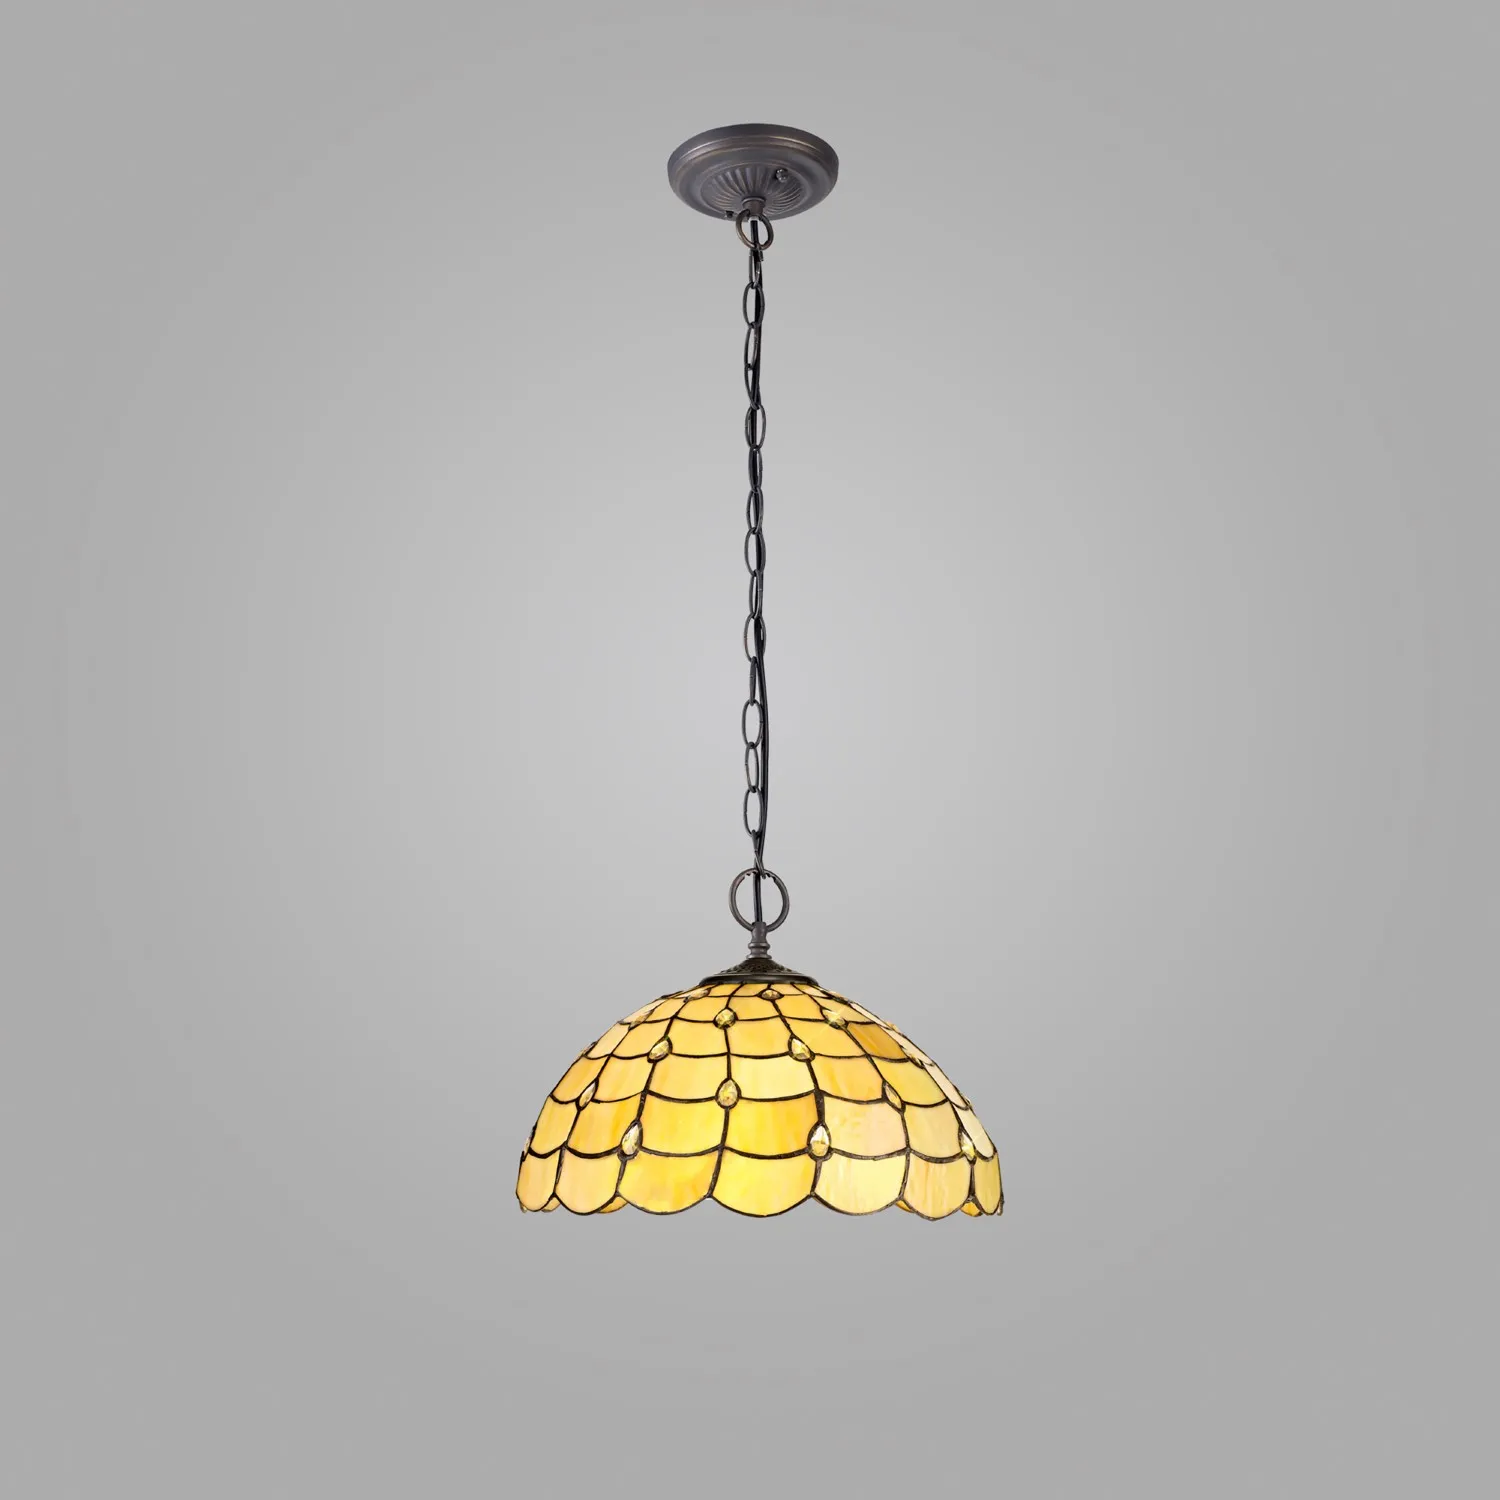 Stratford 2 Light Downlighter Pendant E27 With 40cm Tiffany Shade, Beige Clear Crystal Aged Antique Brass